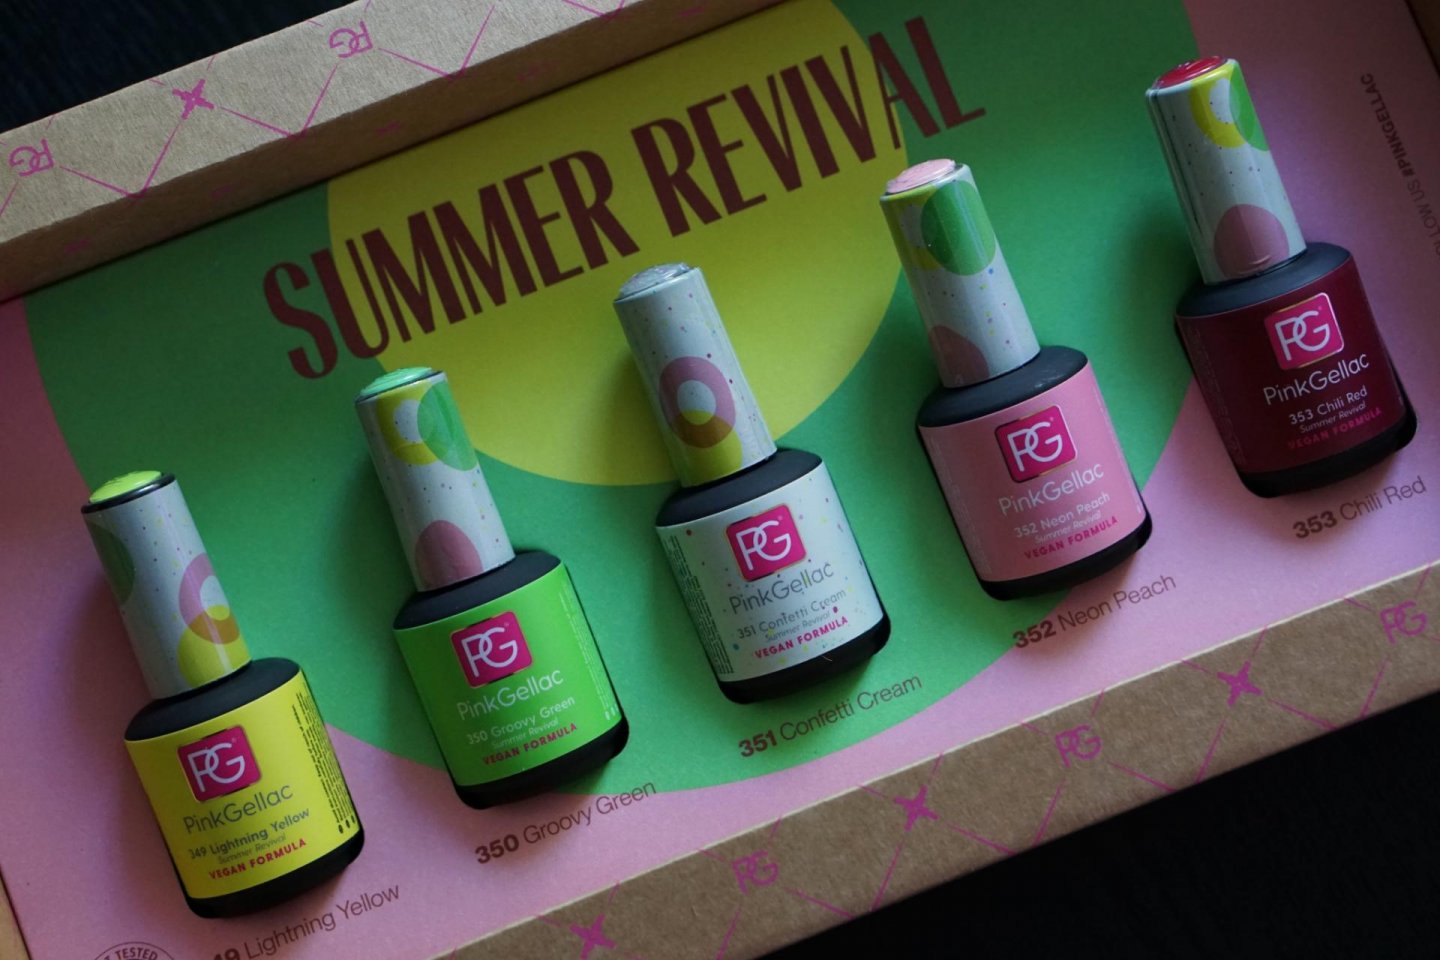 pink gellac summer revival review